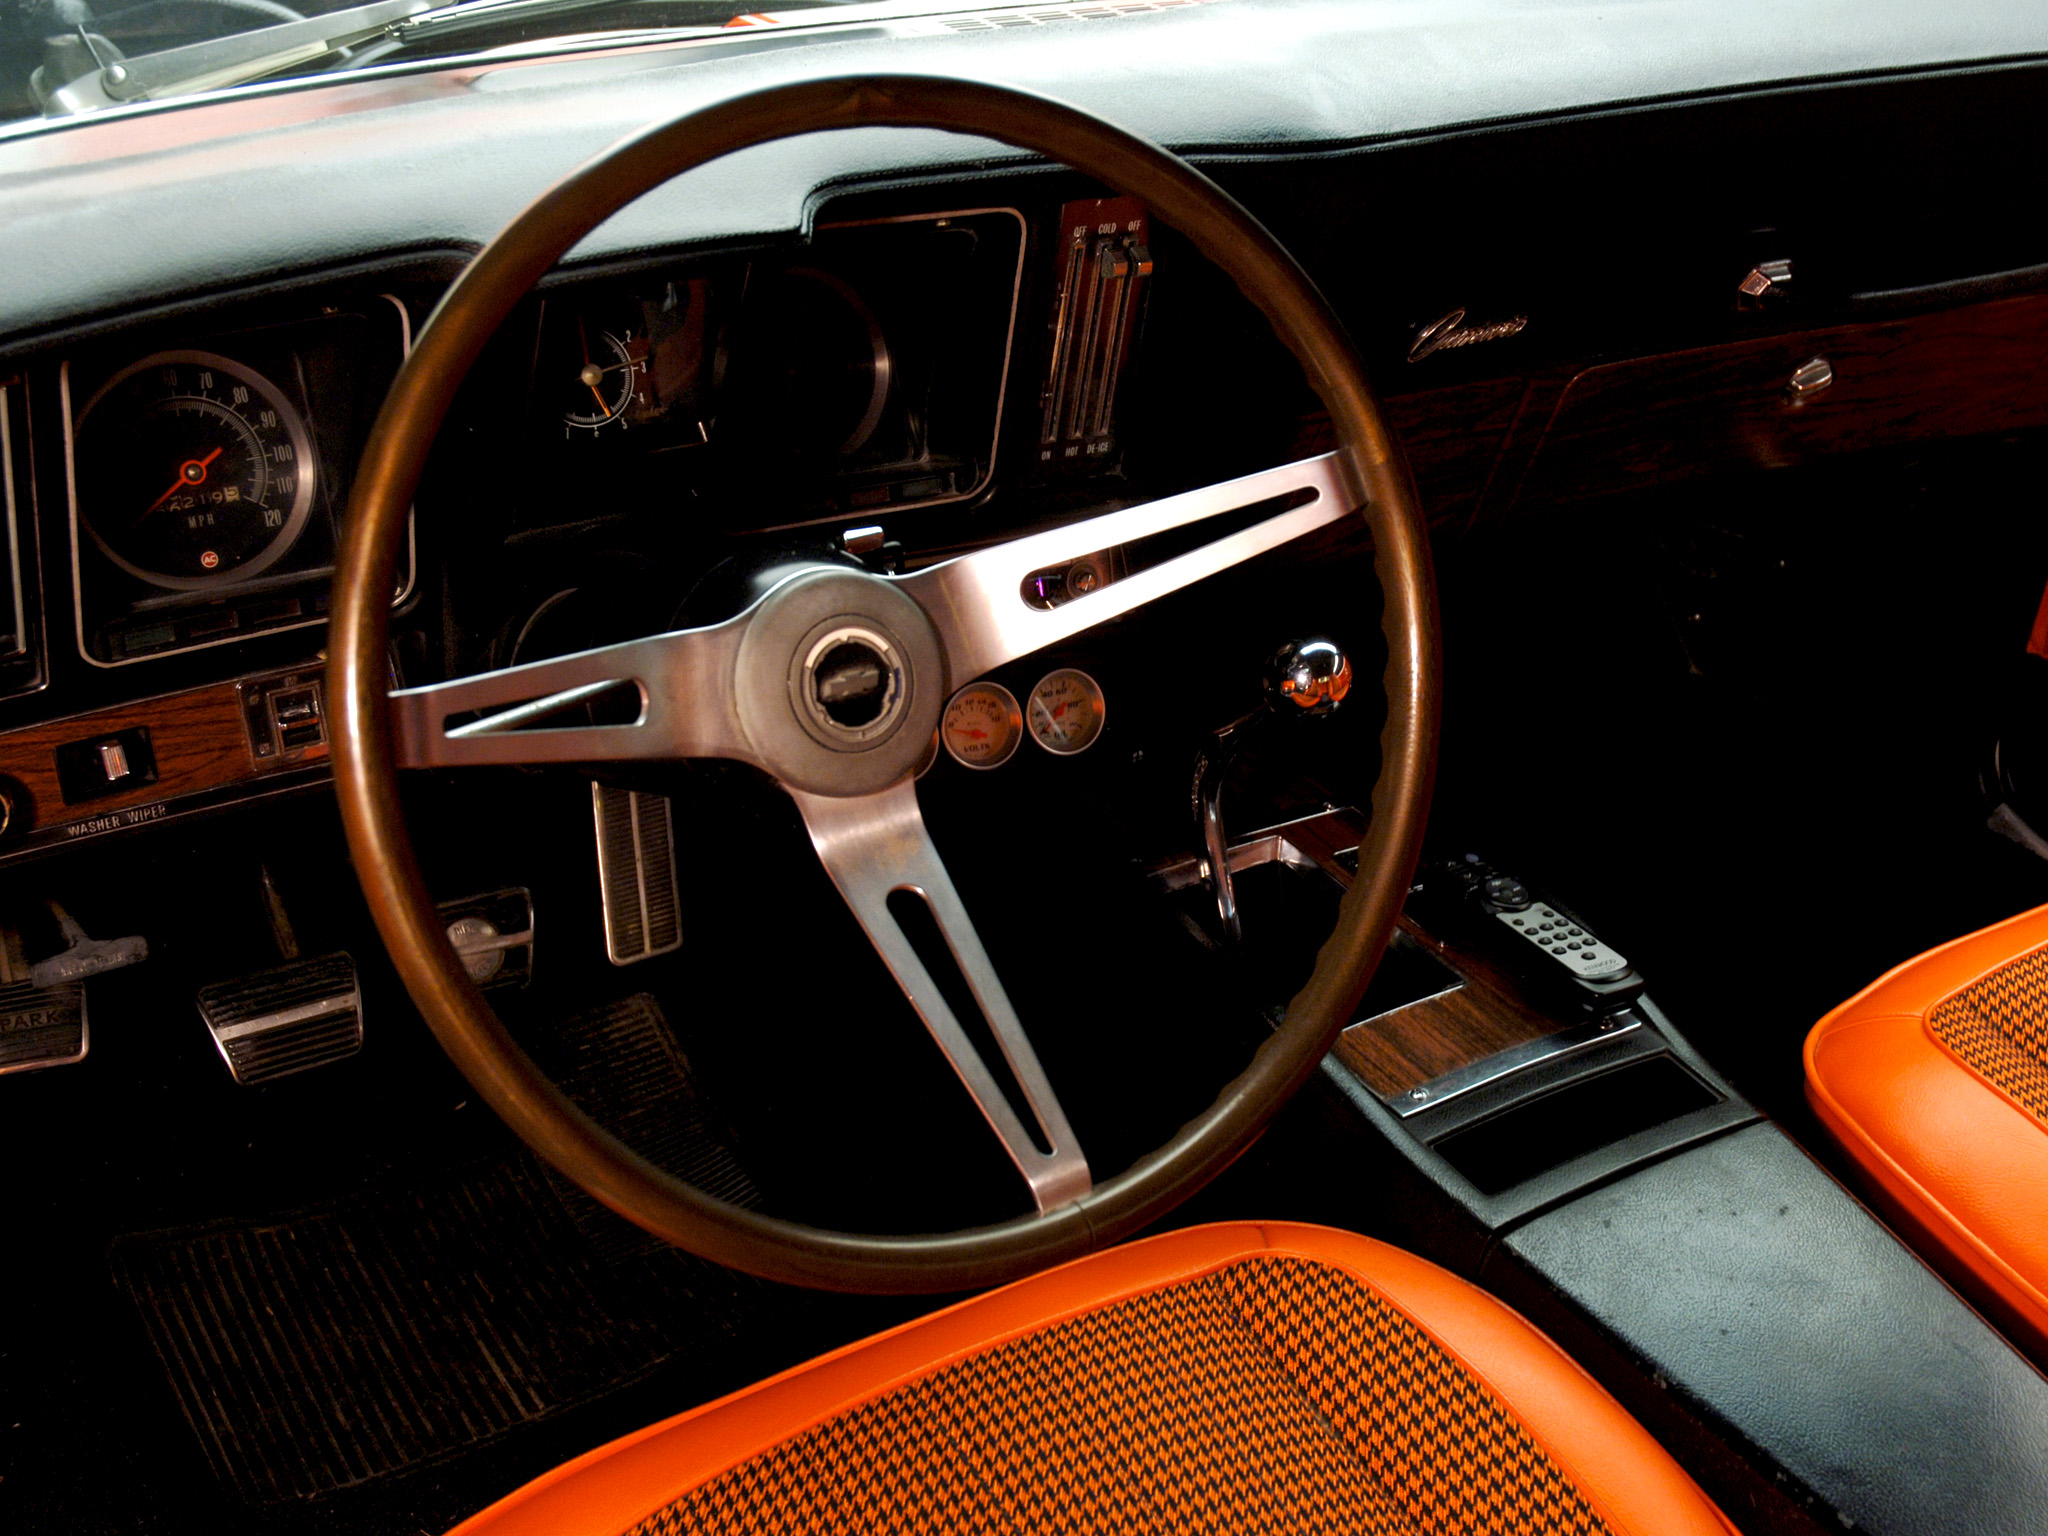 1969, Chevrolet, Camaro, Rs ss, 350, Convertible, Indy, 500, Pace, Car, Muscle, Classic, Race, Racing, S s, Interior Wallpaper